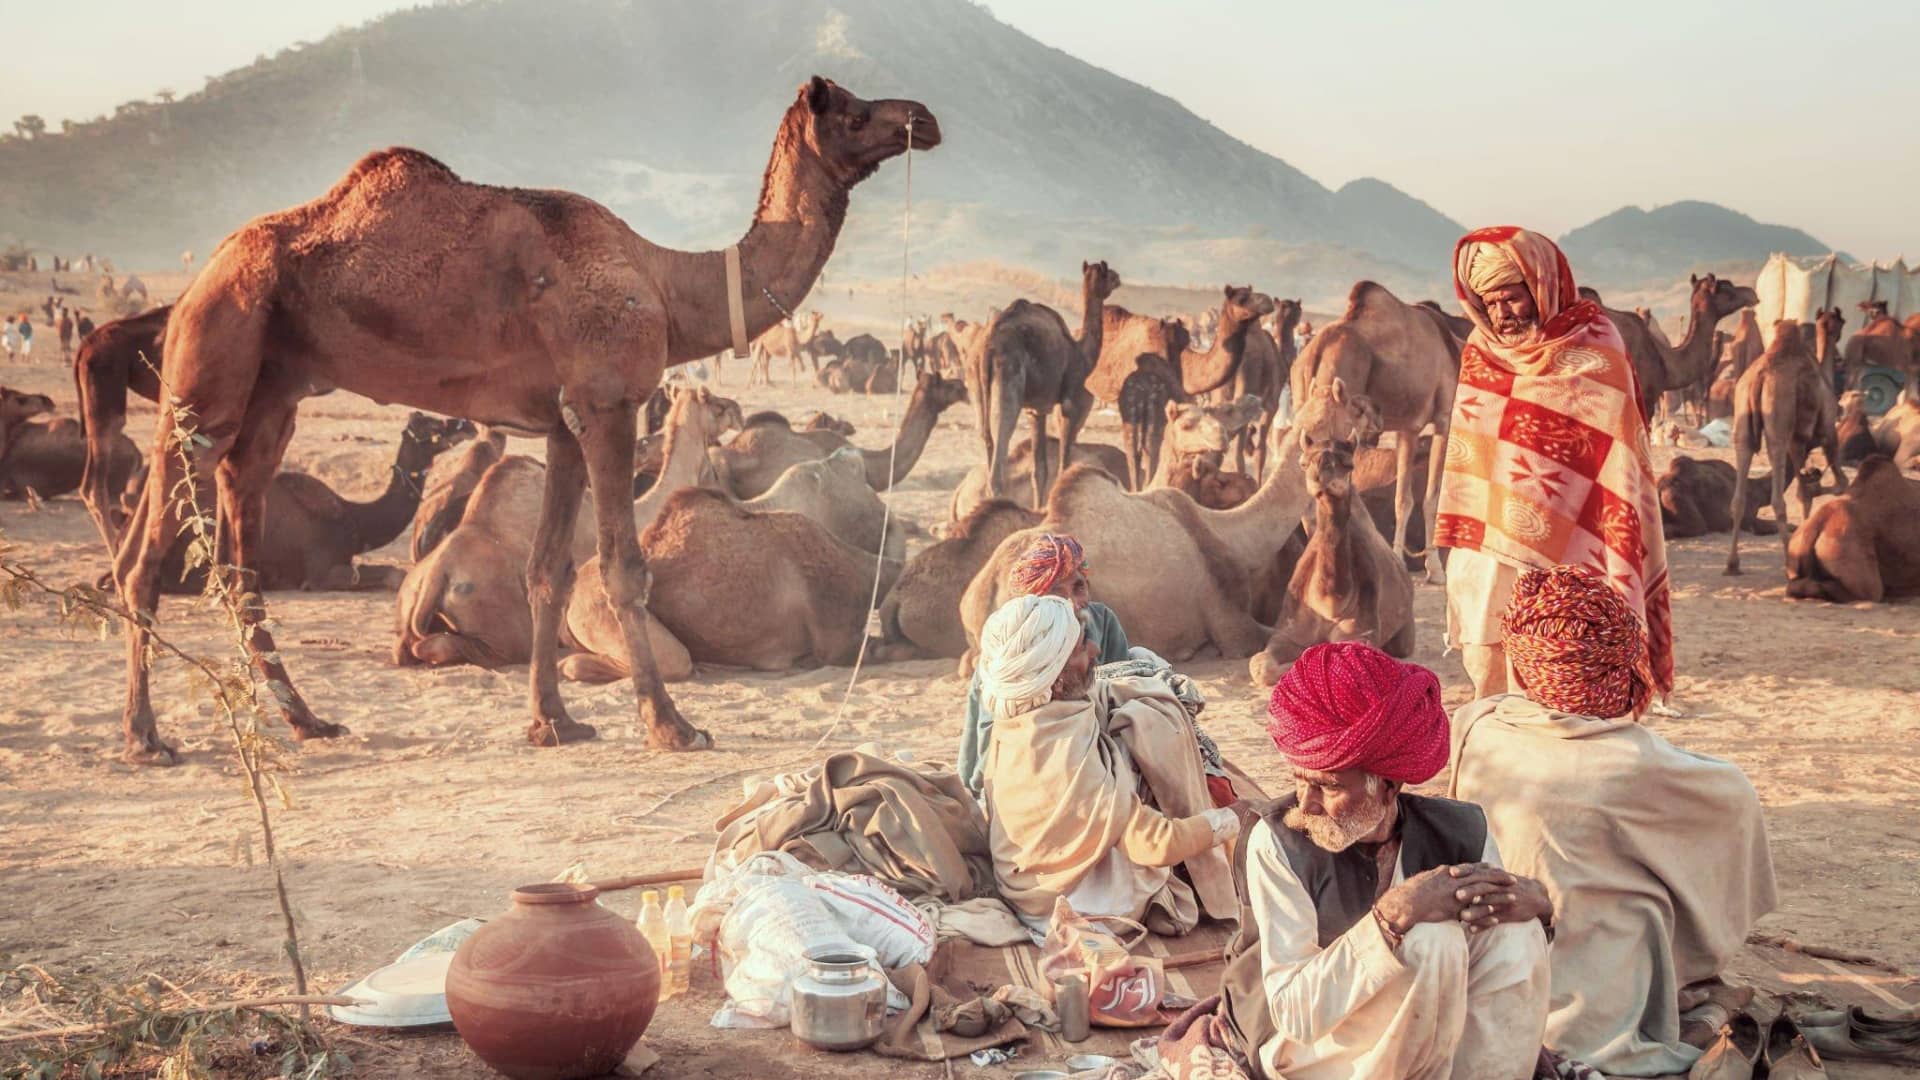 a group of people sitting in the sand with camels in the background